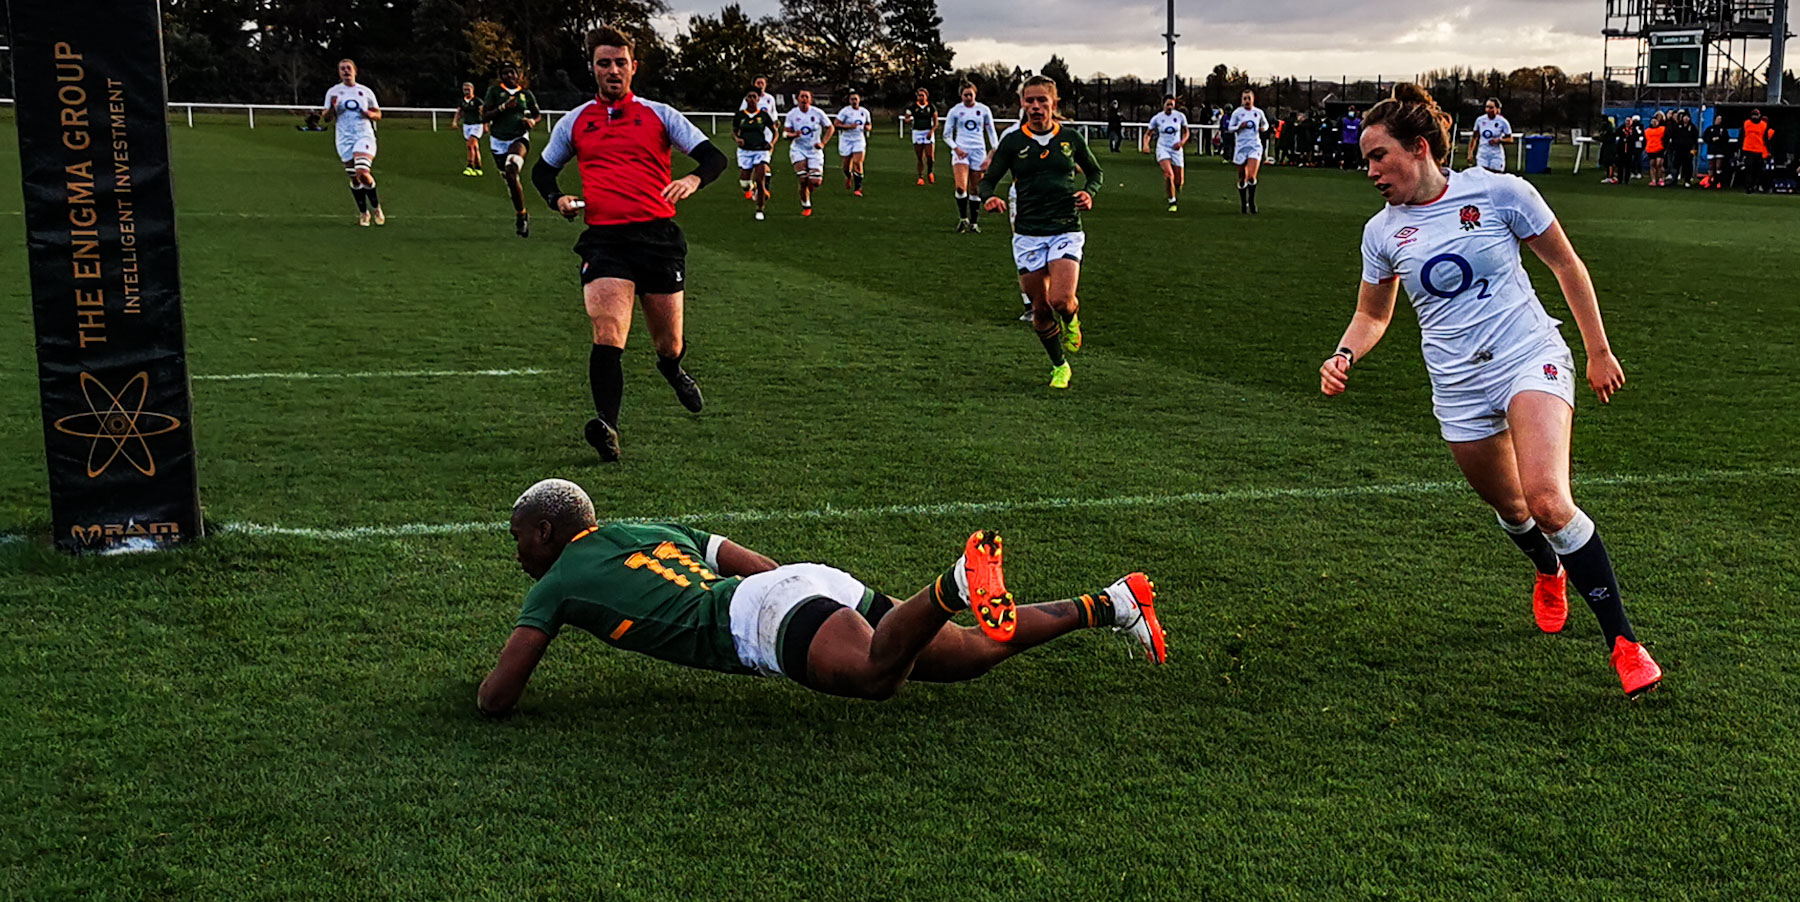 Ayanda Malinga crosses for one of her two tries.